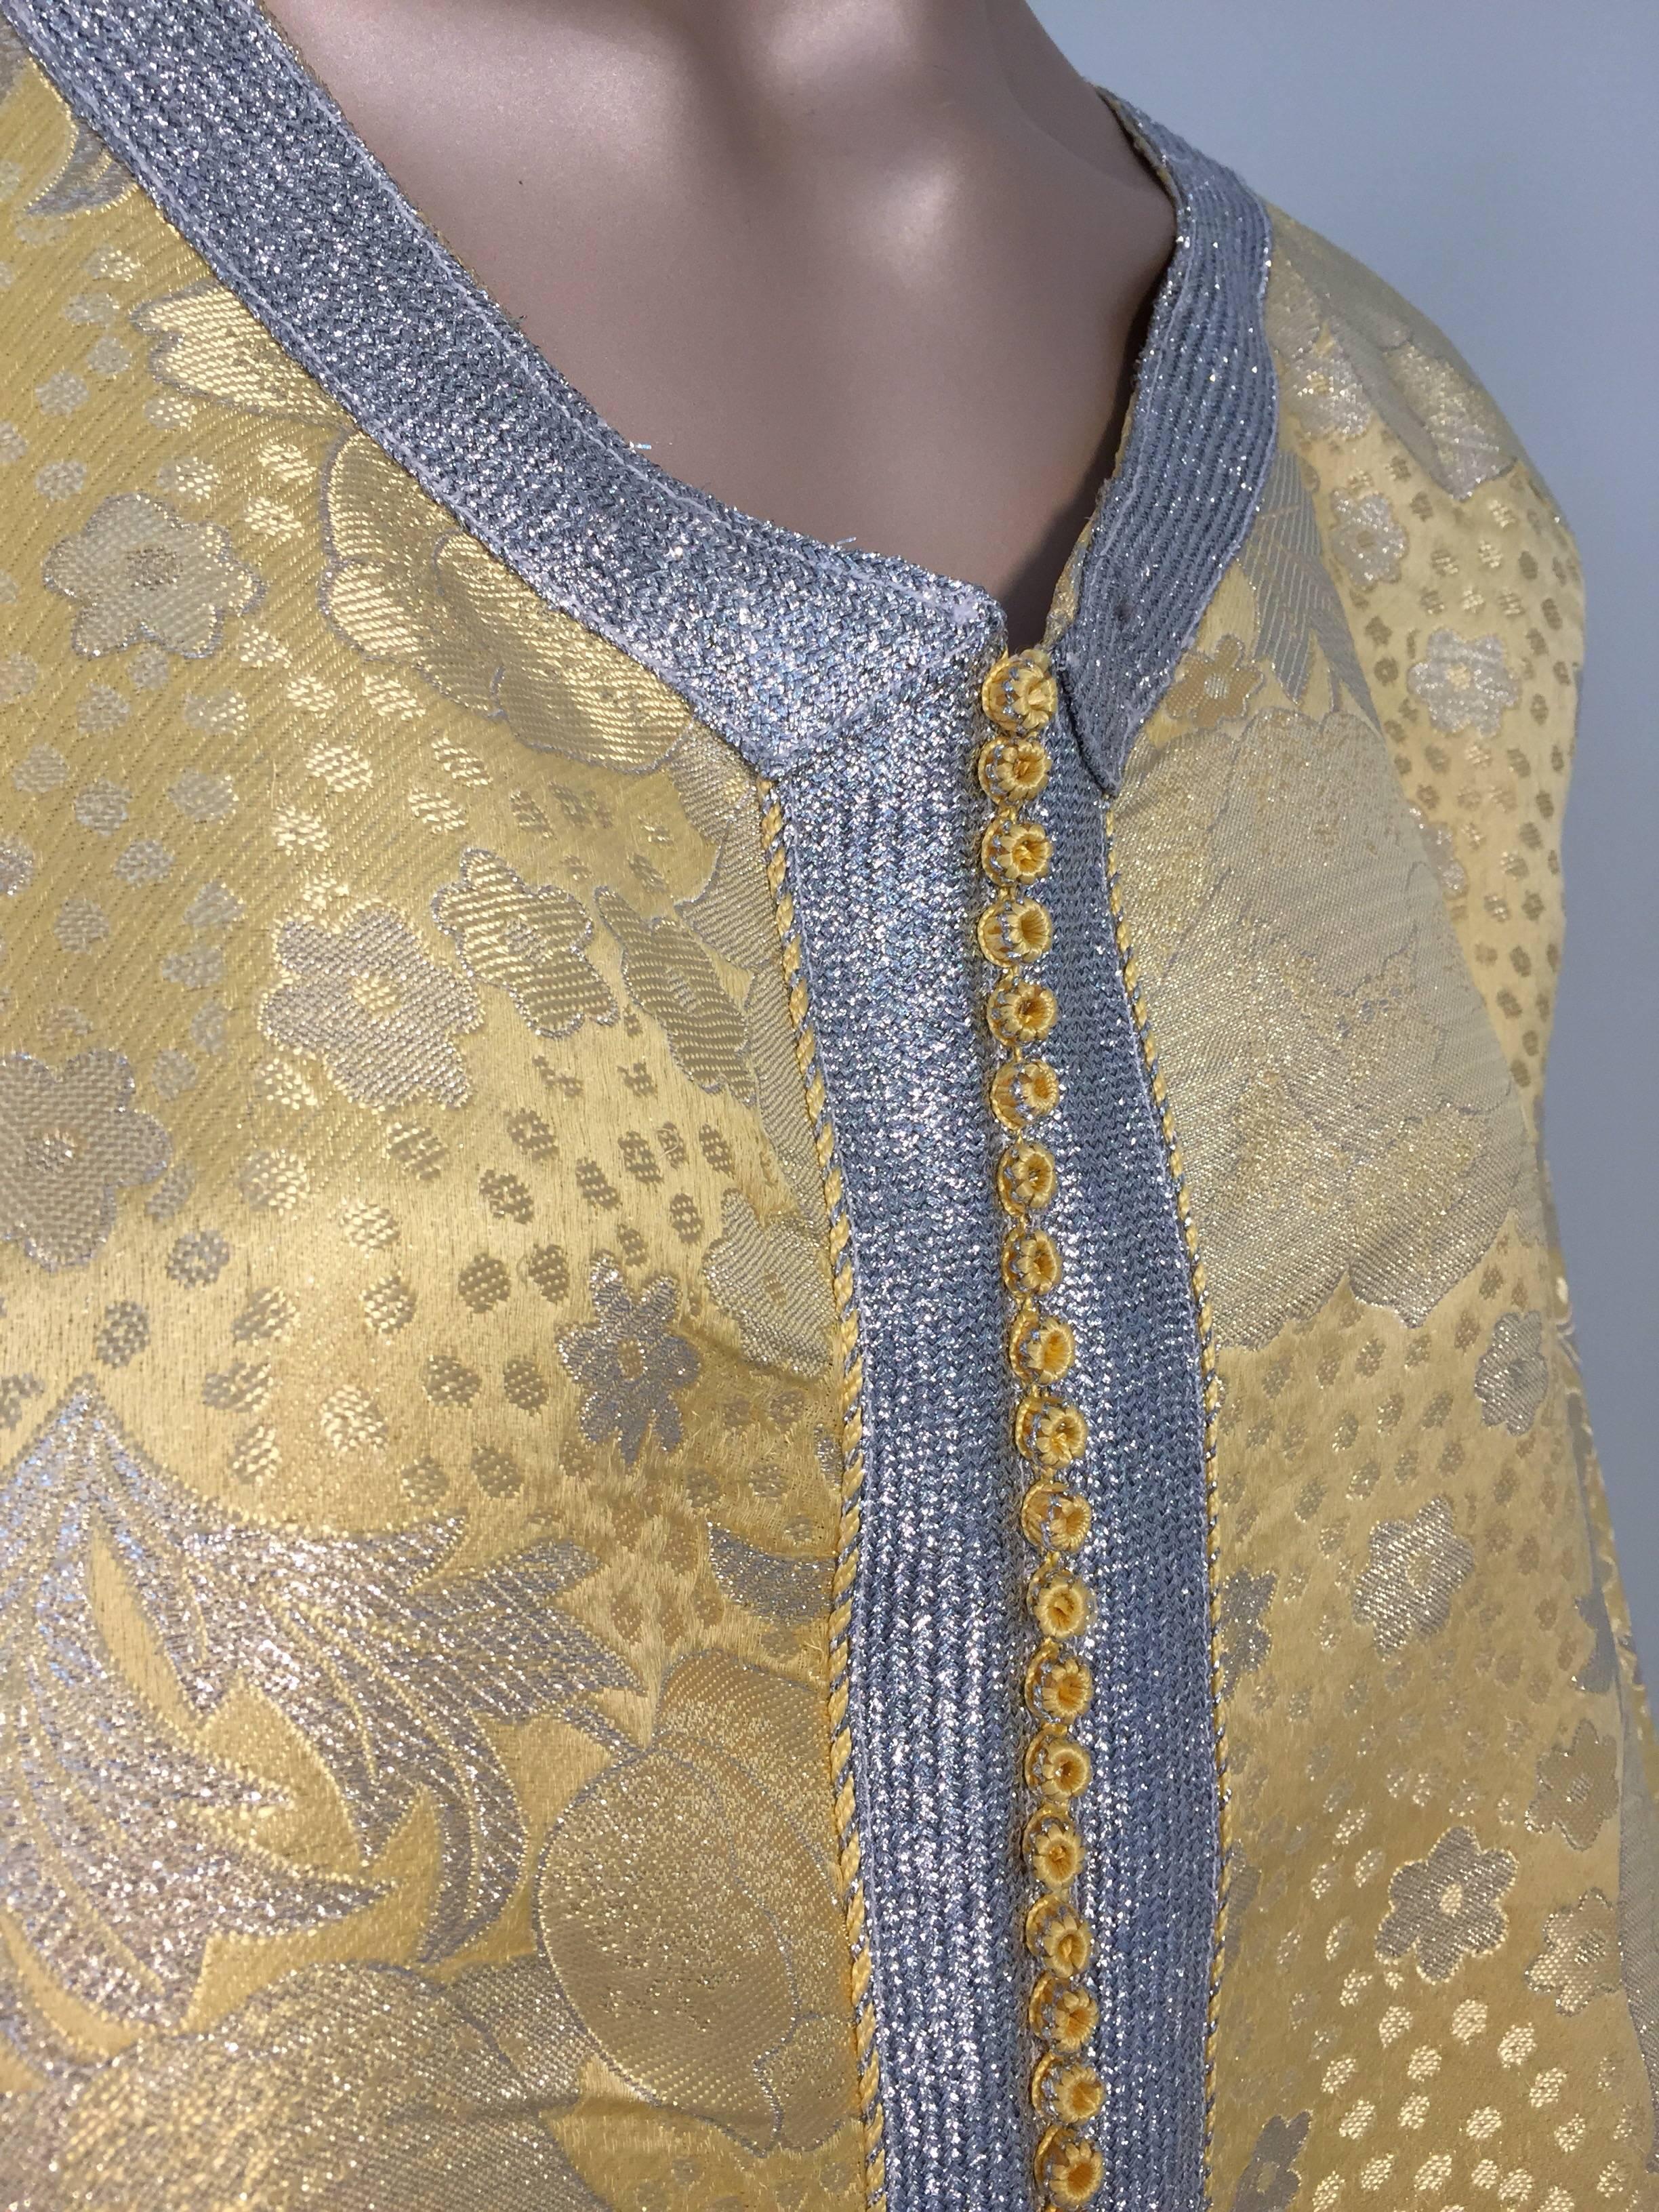 Metallic Gold and Silver Brocade 1970s Maxi Dress Caftan, Evening Gown Kaftan In Good Condition For Sale In North Hollywood, CA